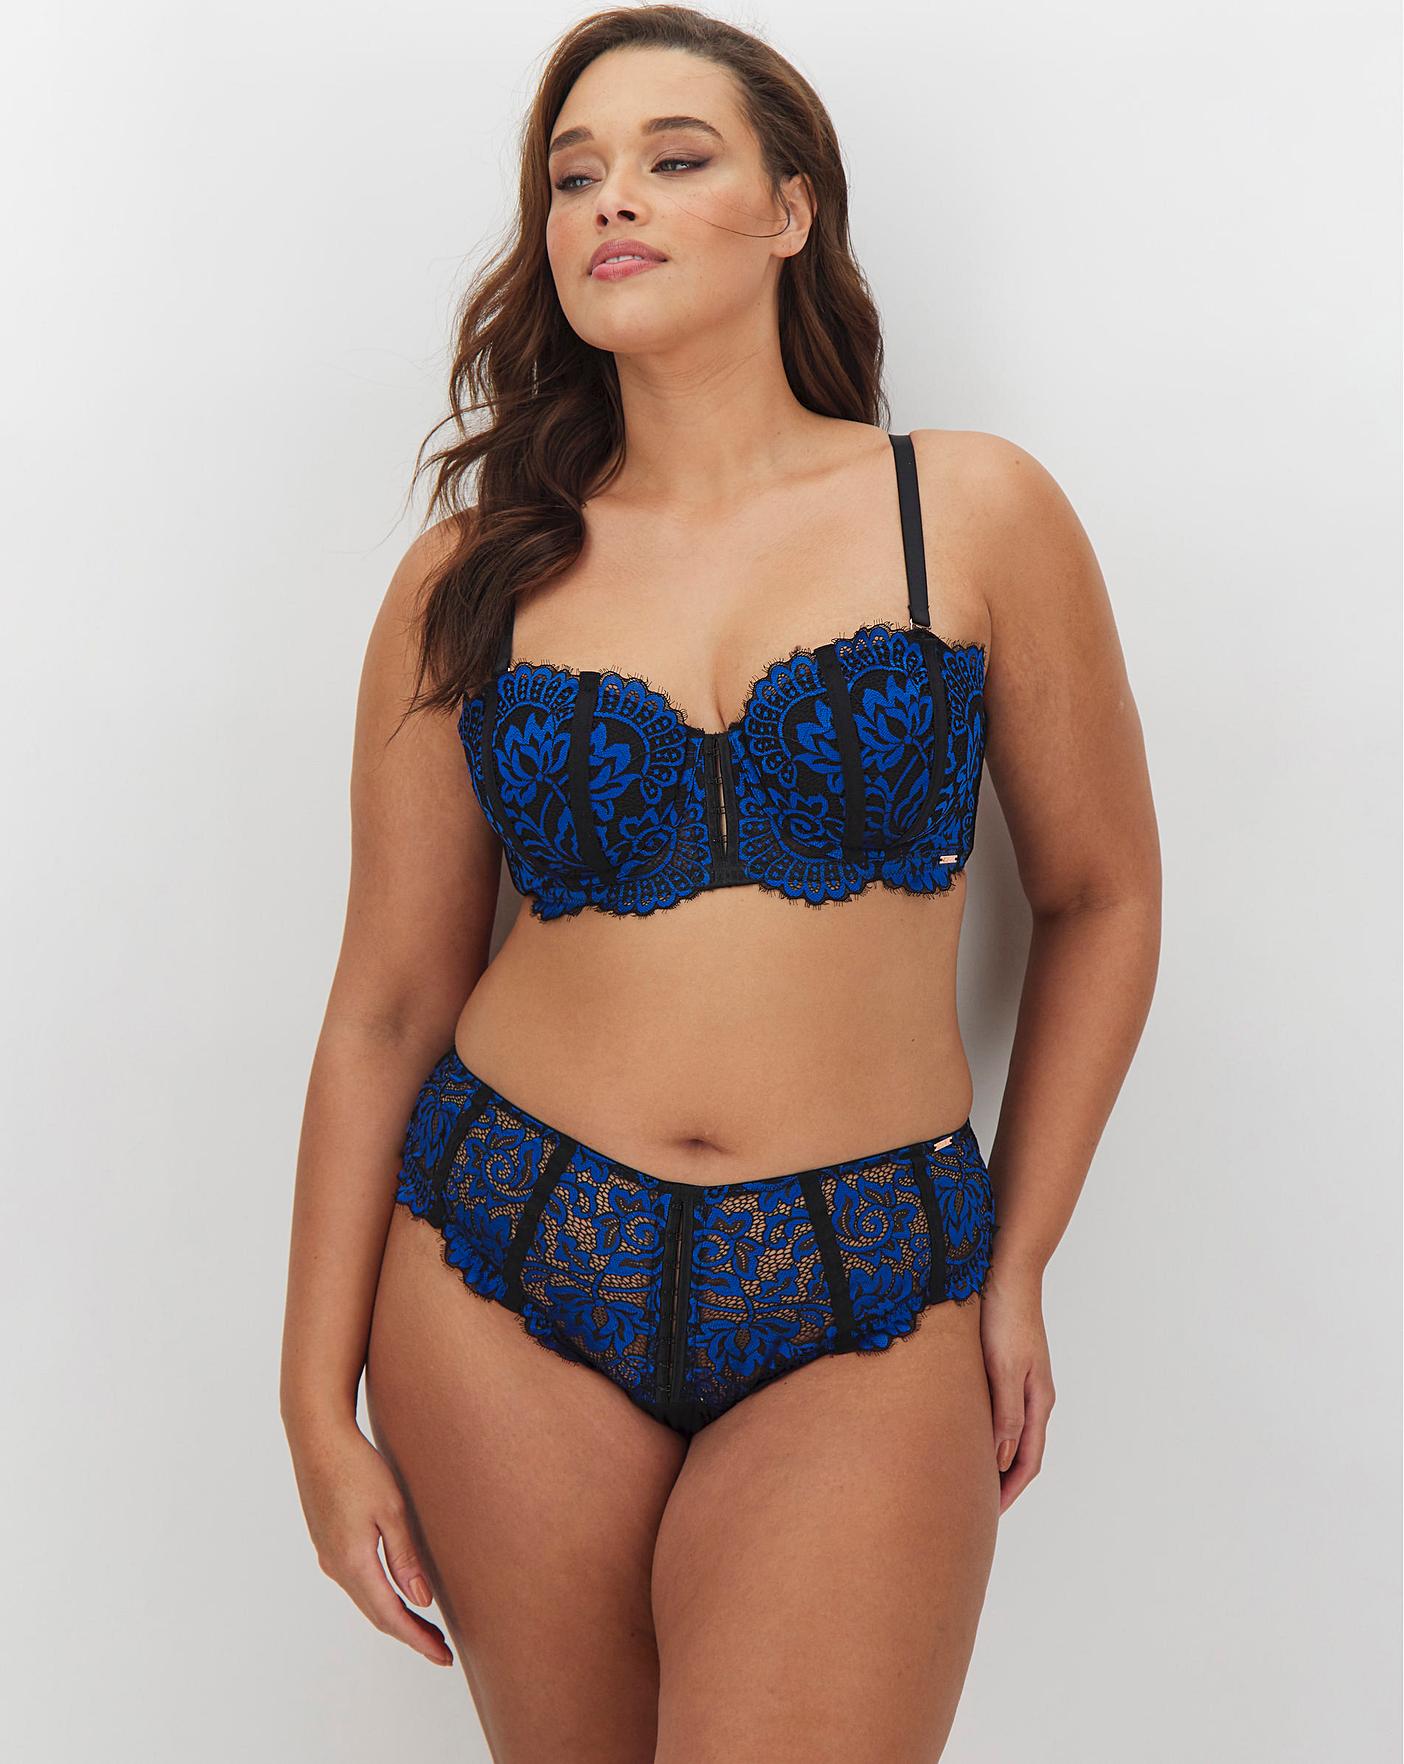 Figleaves Curve Full Cup, Bras